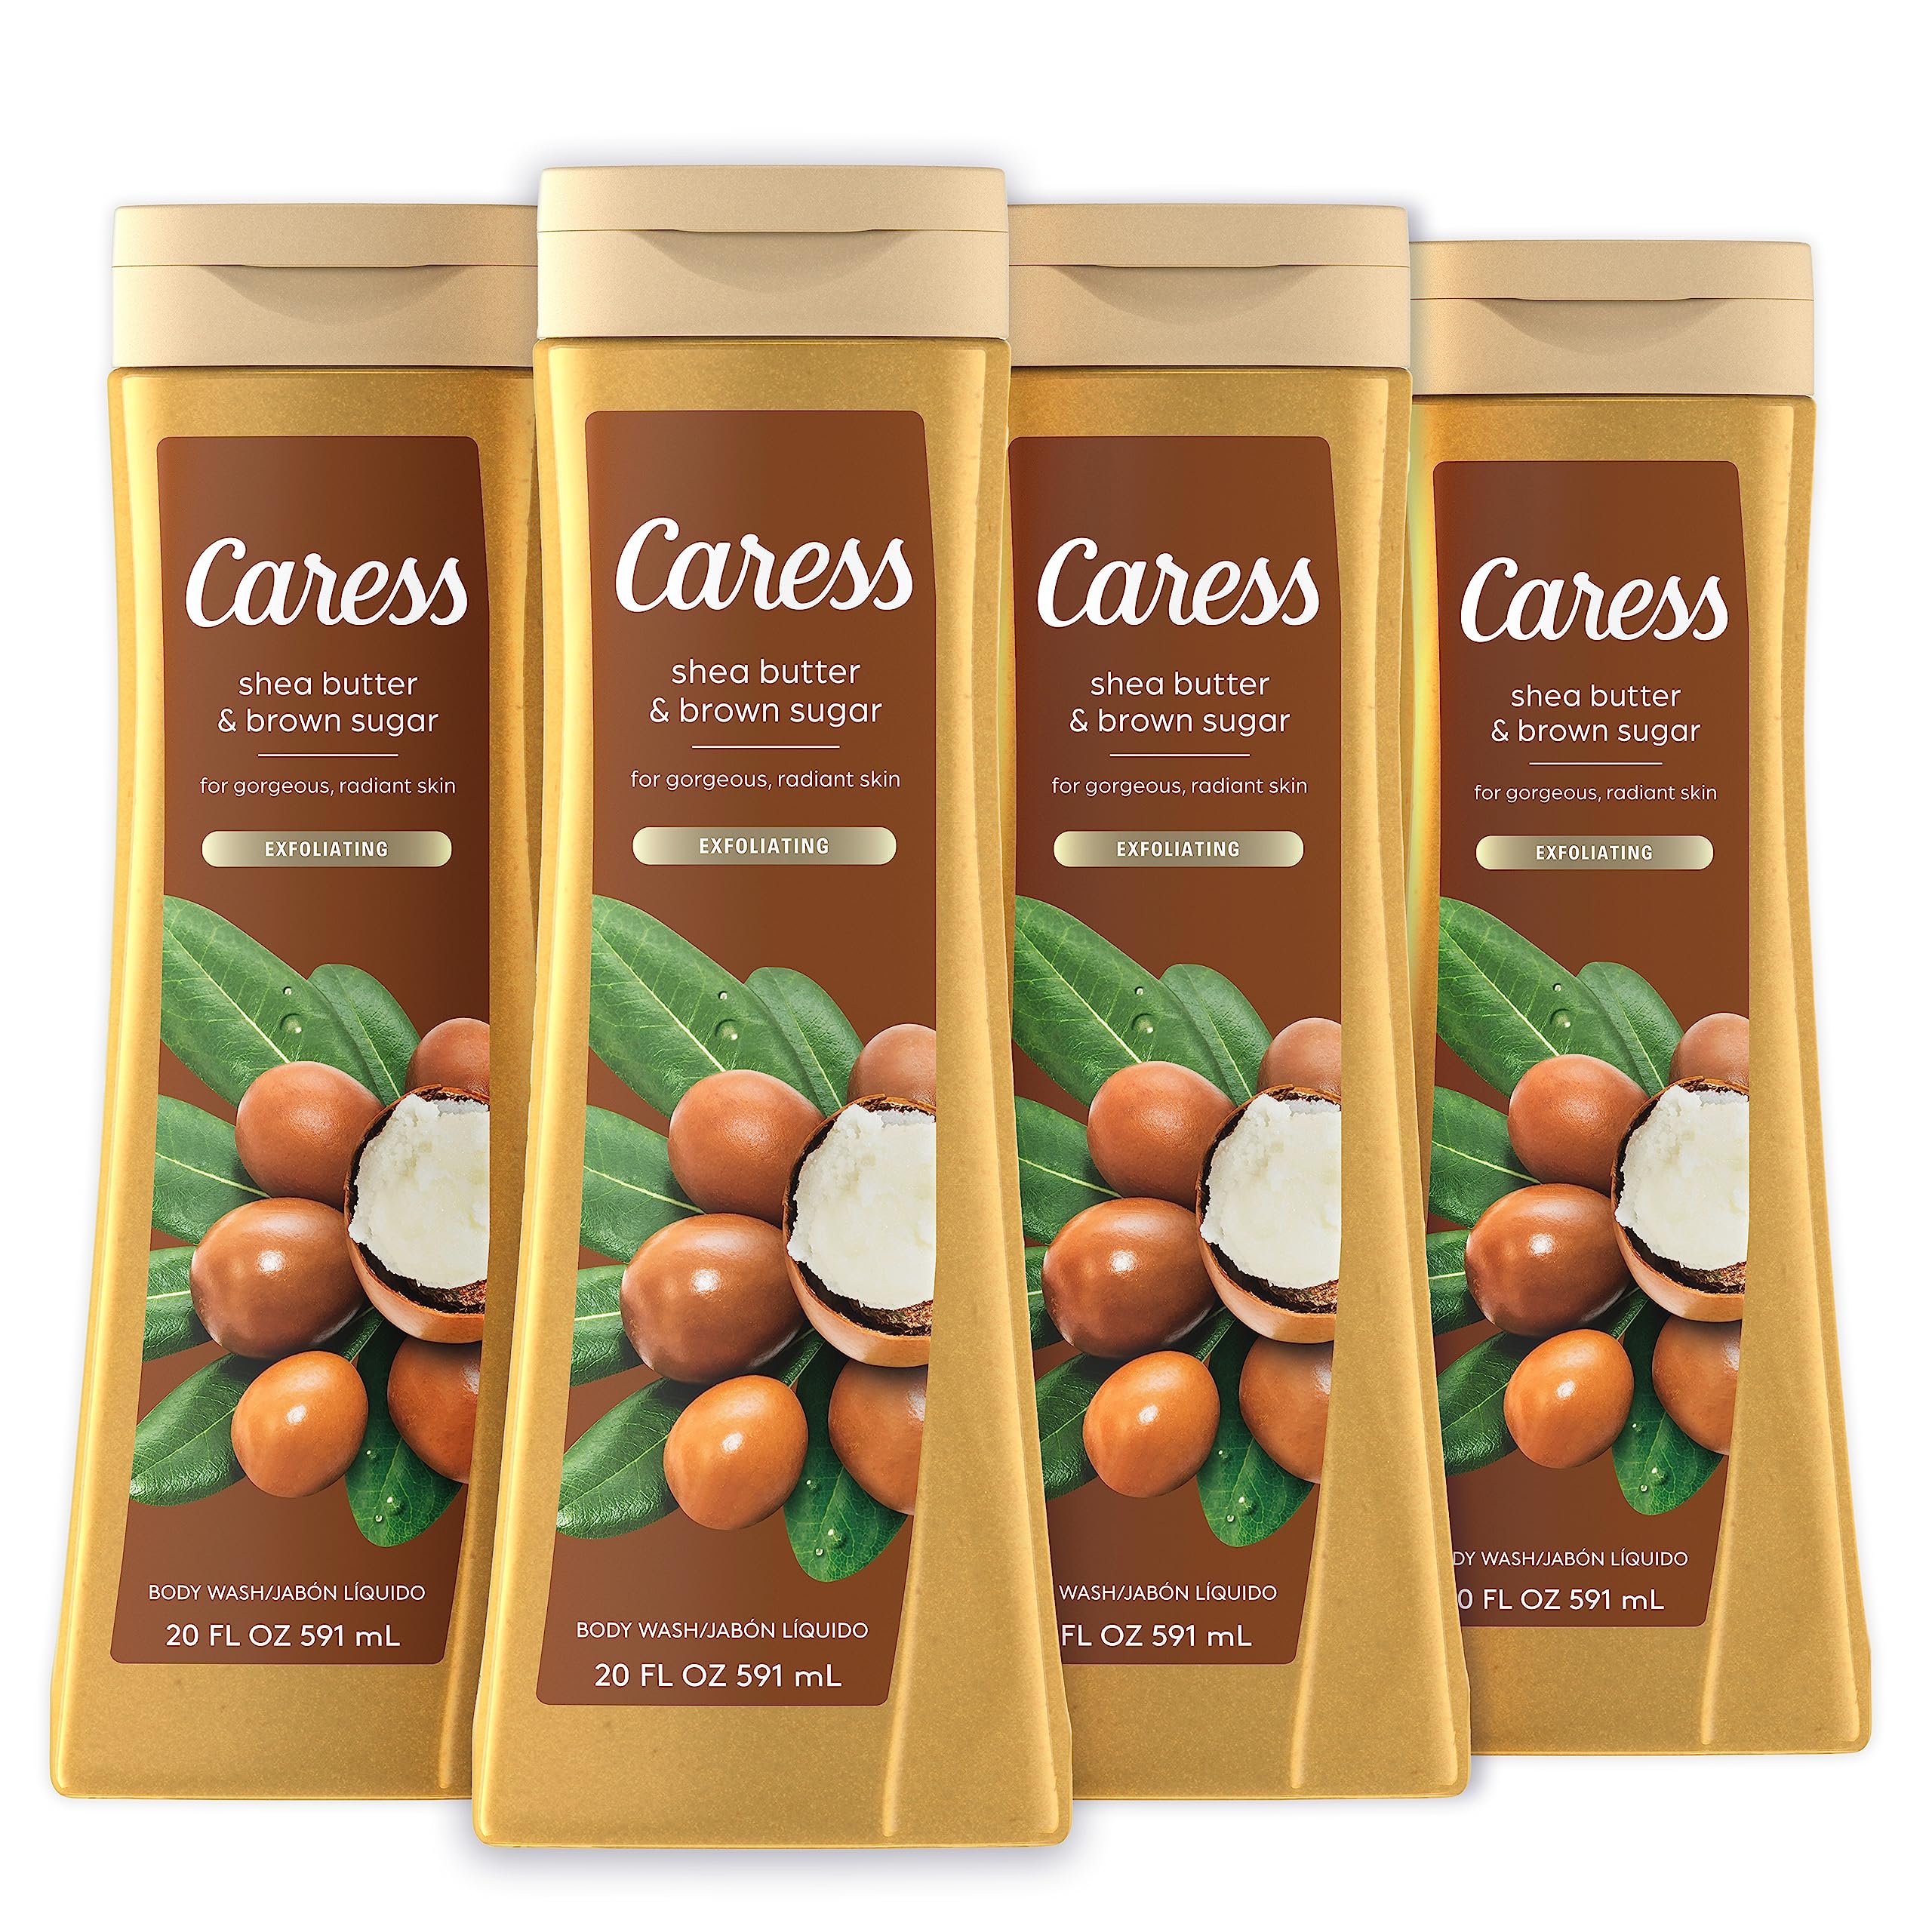 Caress Body Wash Shea Butter & Brown Sugar For Gorgeous, Radiant Skin Hydrating and Exfoliating Body Wash 20 fl oz, Pack of 4